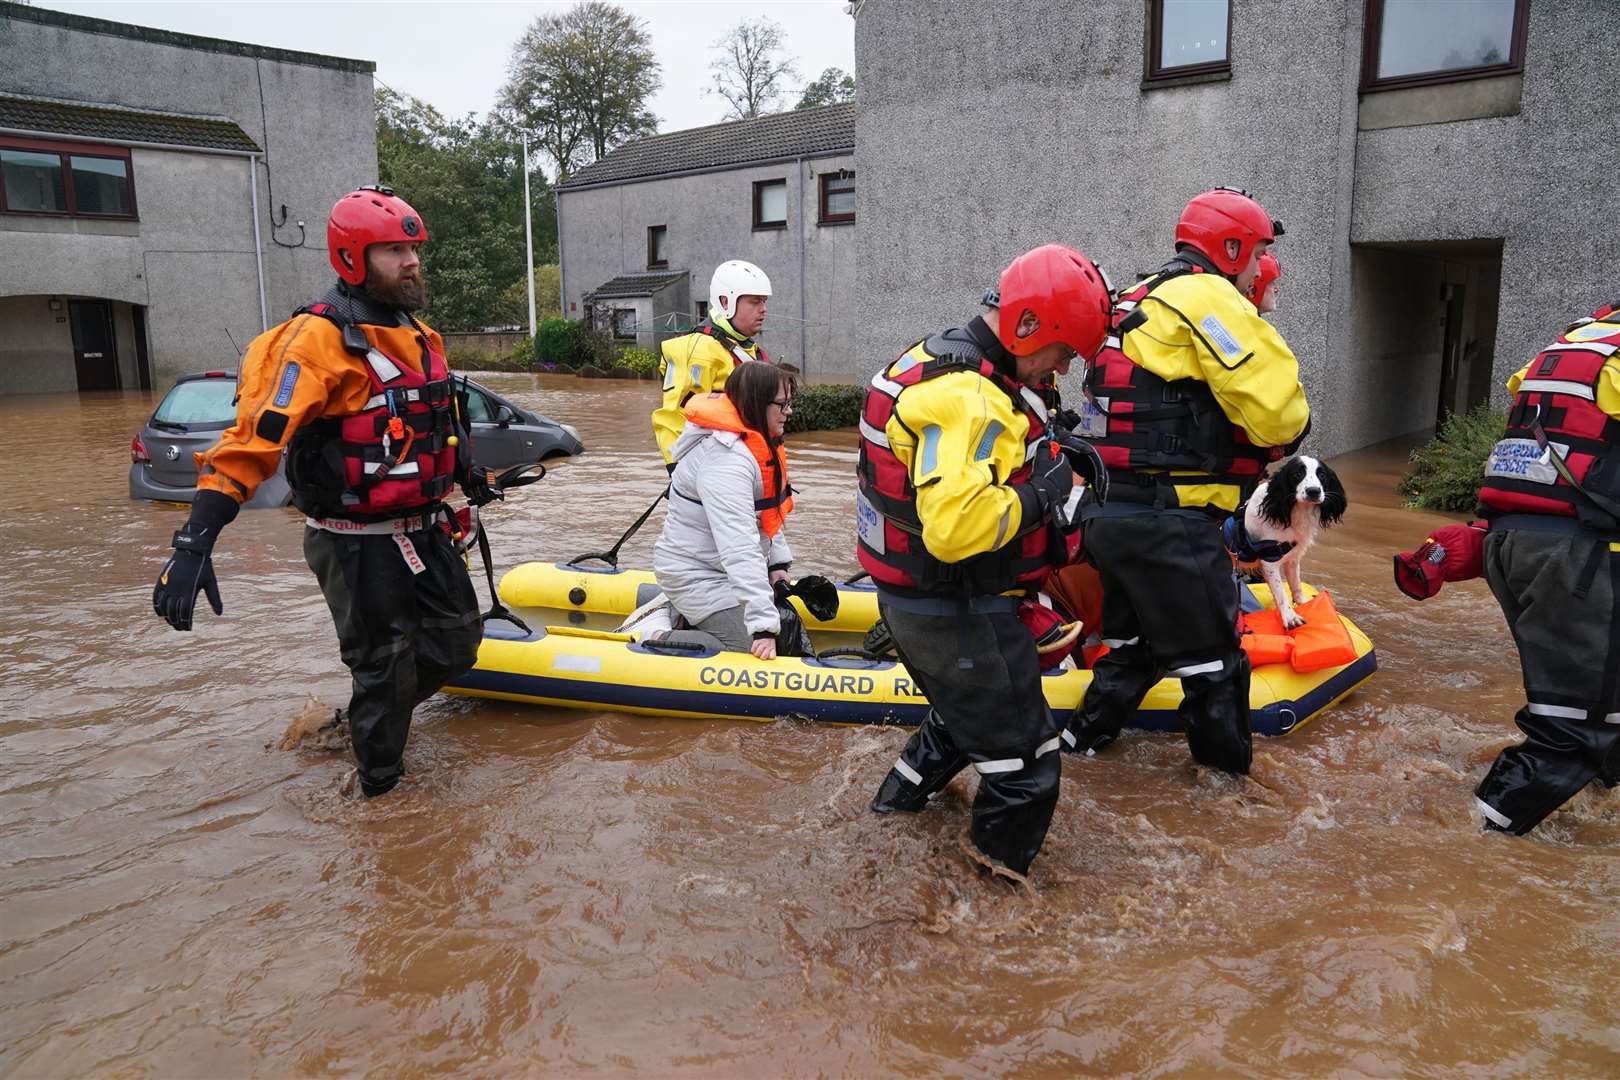 Members of the emergency services help local residents to safety in Brechin (Andrew Milligan/PA)